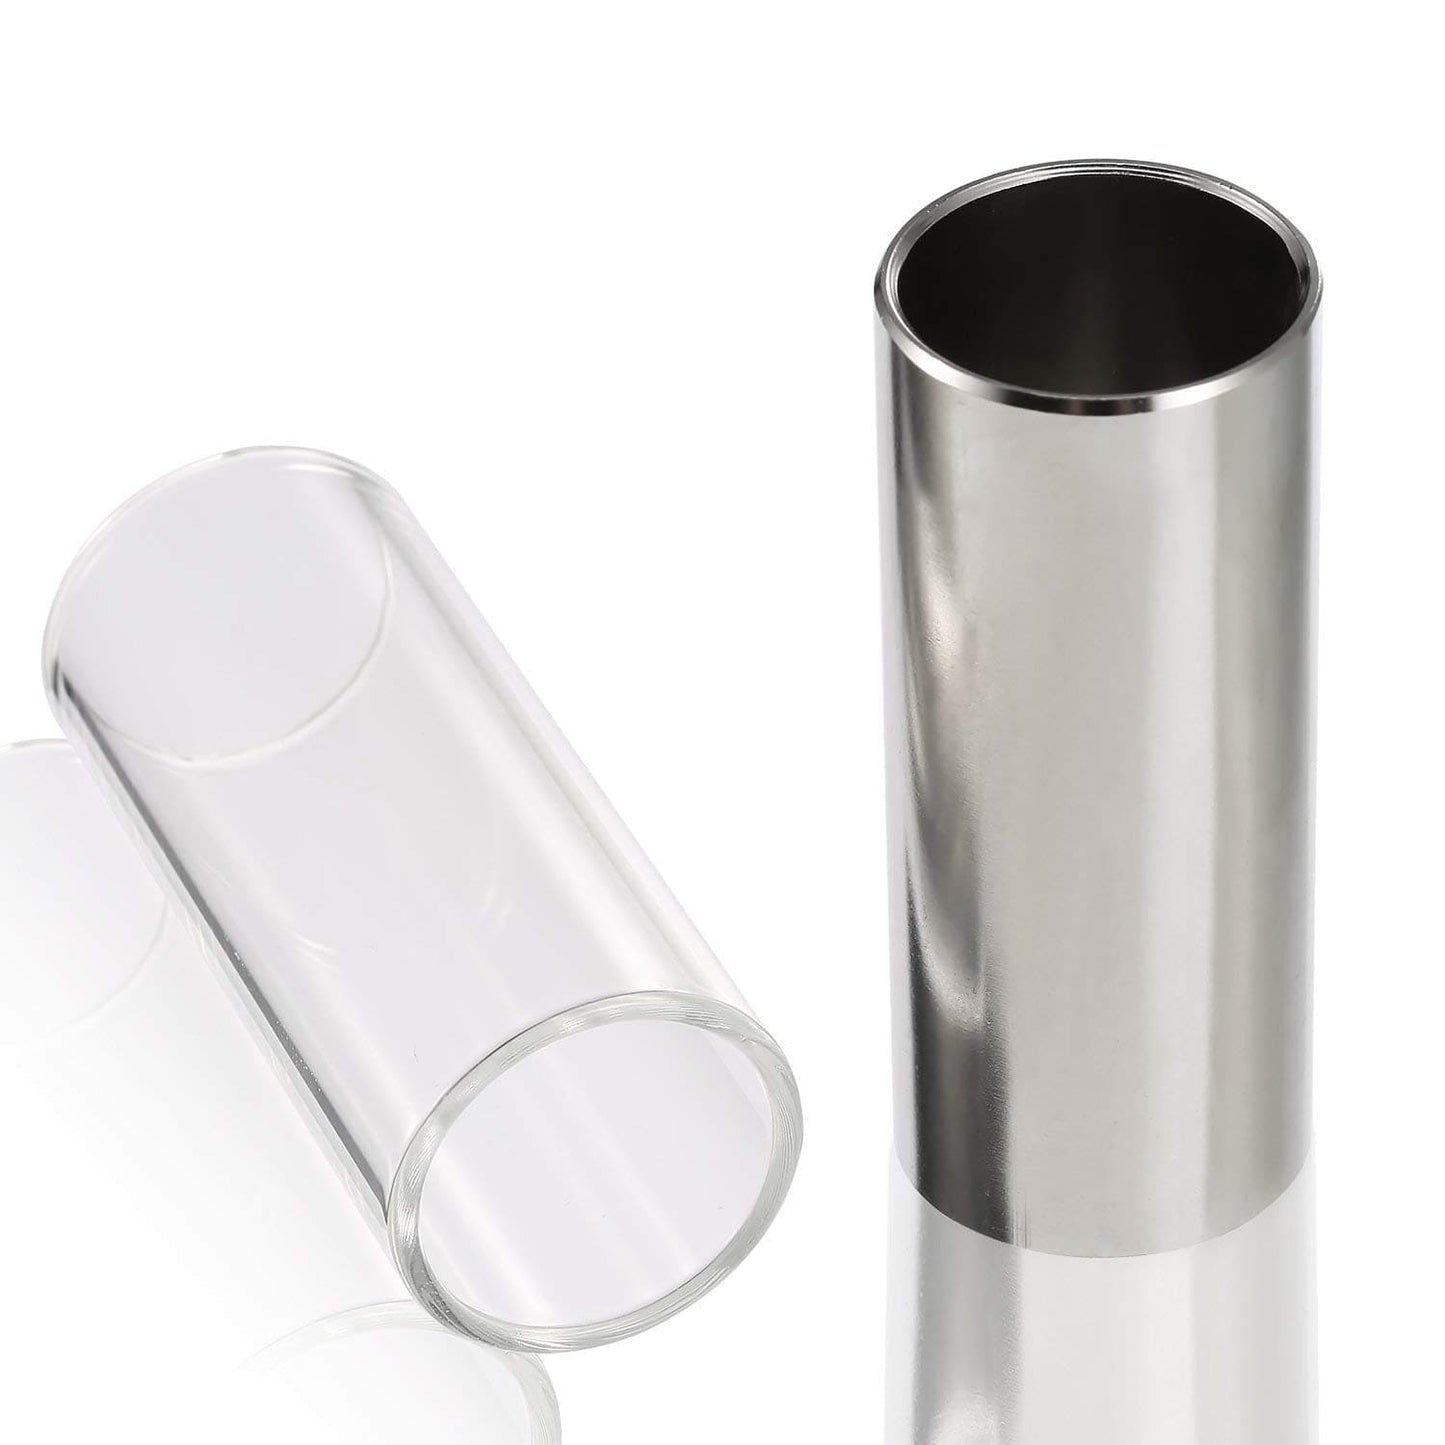 2 Pieces Glass Slide and Stainless Steel Slide in Box for Guitar, Bass, Medium (6 cm)